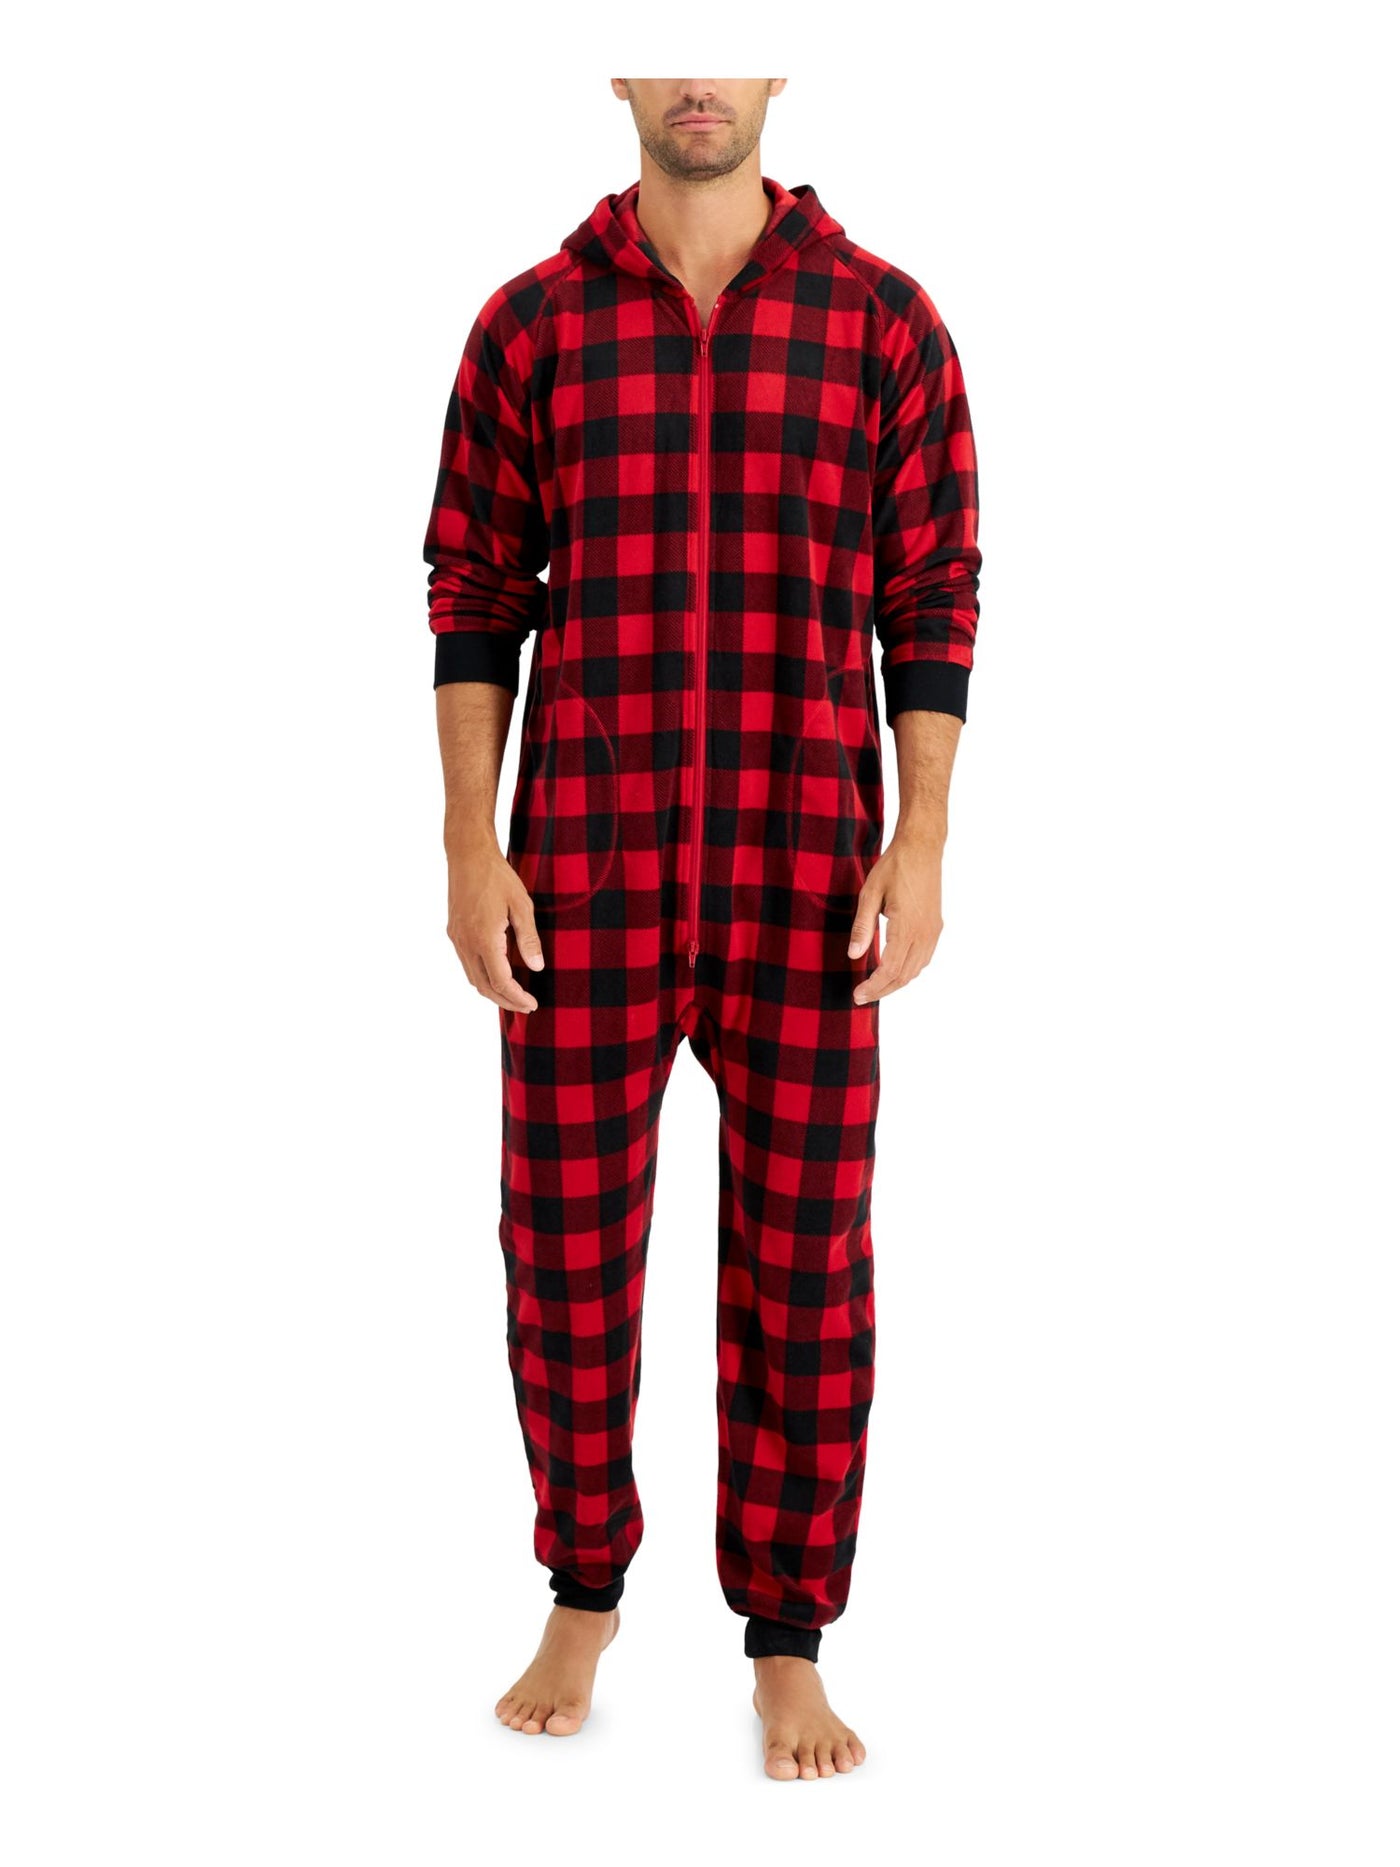 FAMILY PJs Intimates Red Rib-Knit Cuffs Check Holiday S